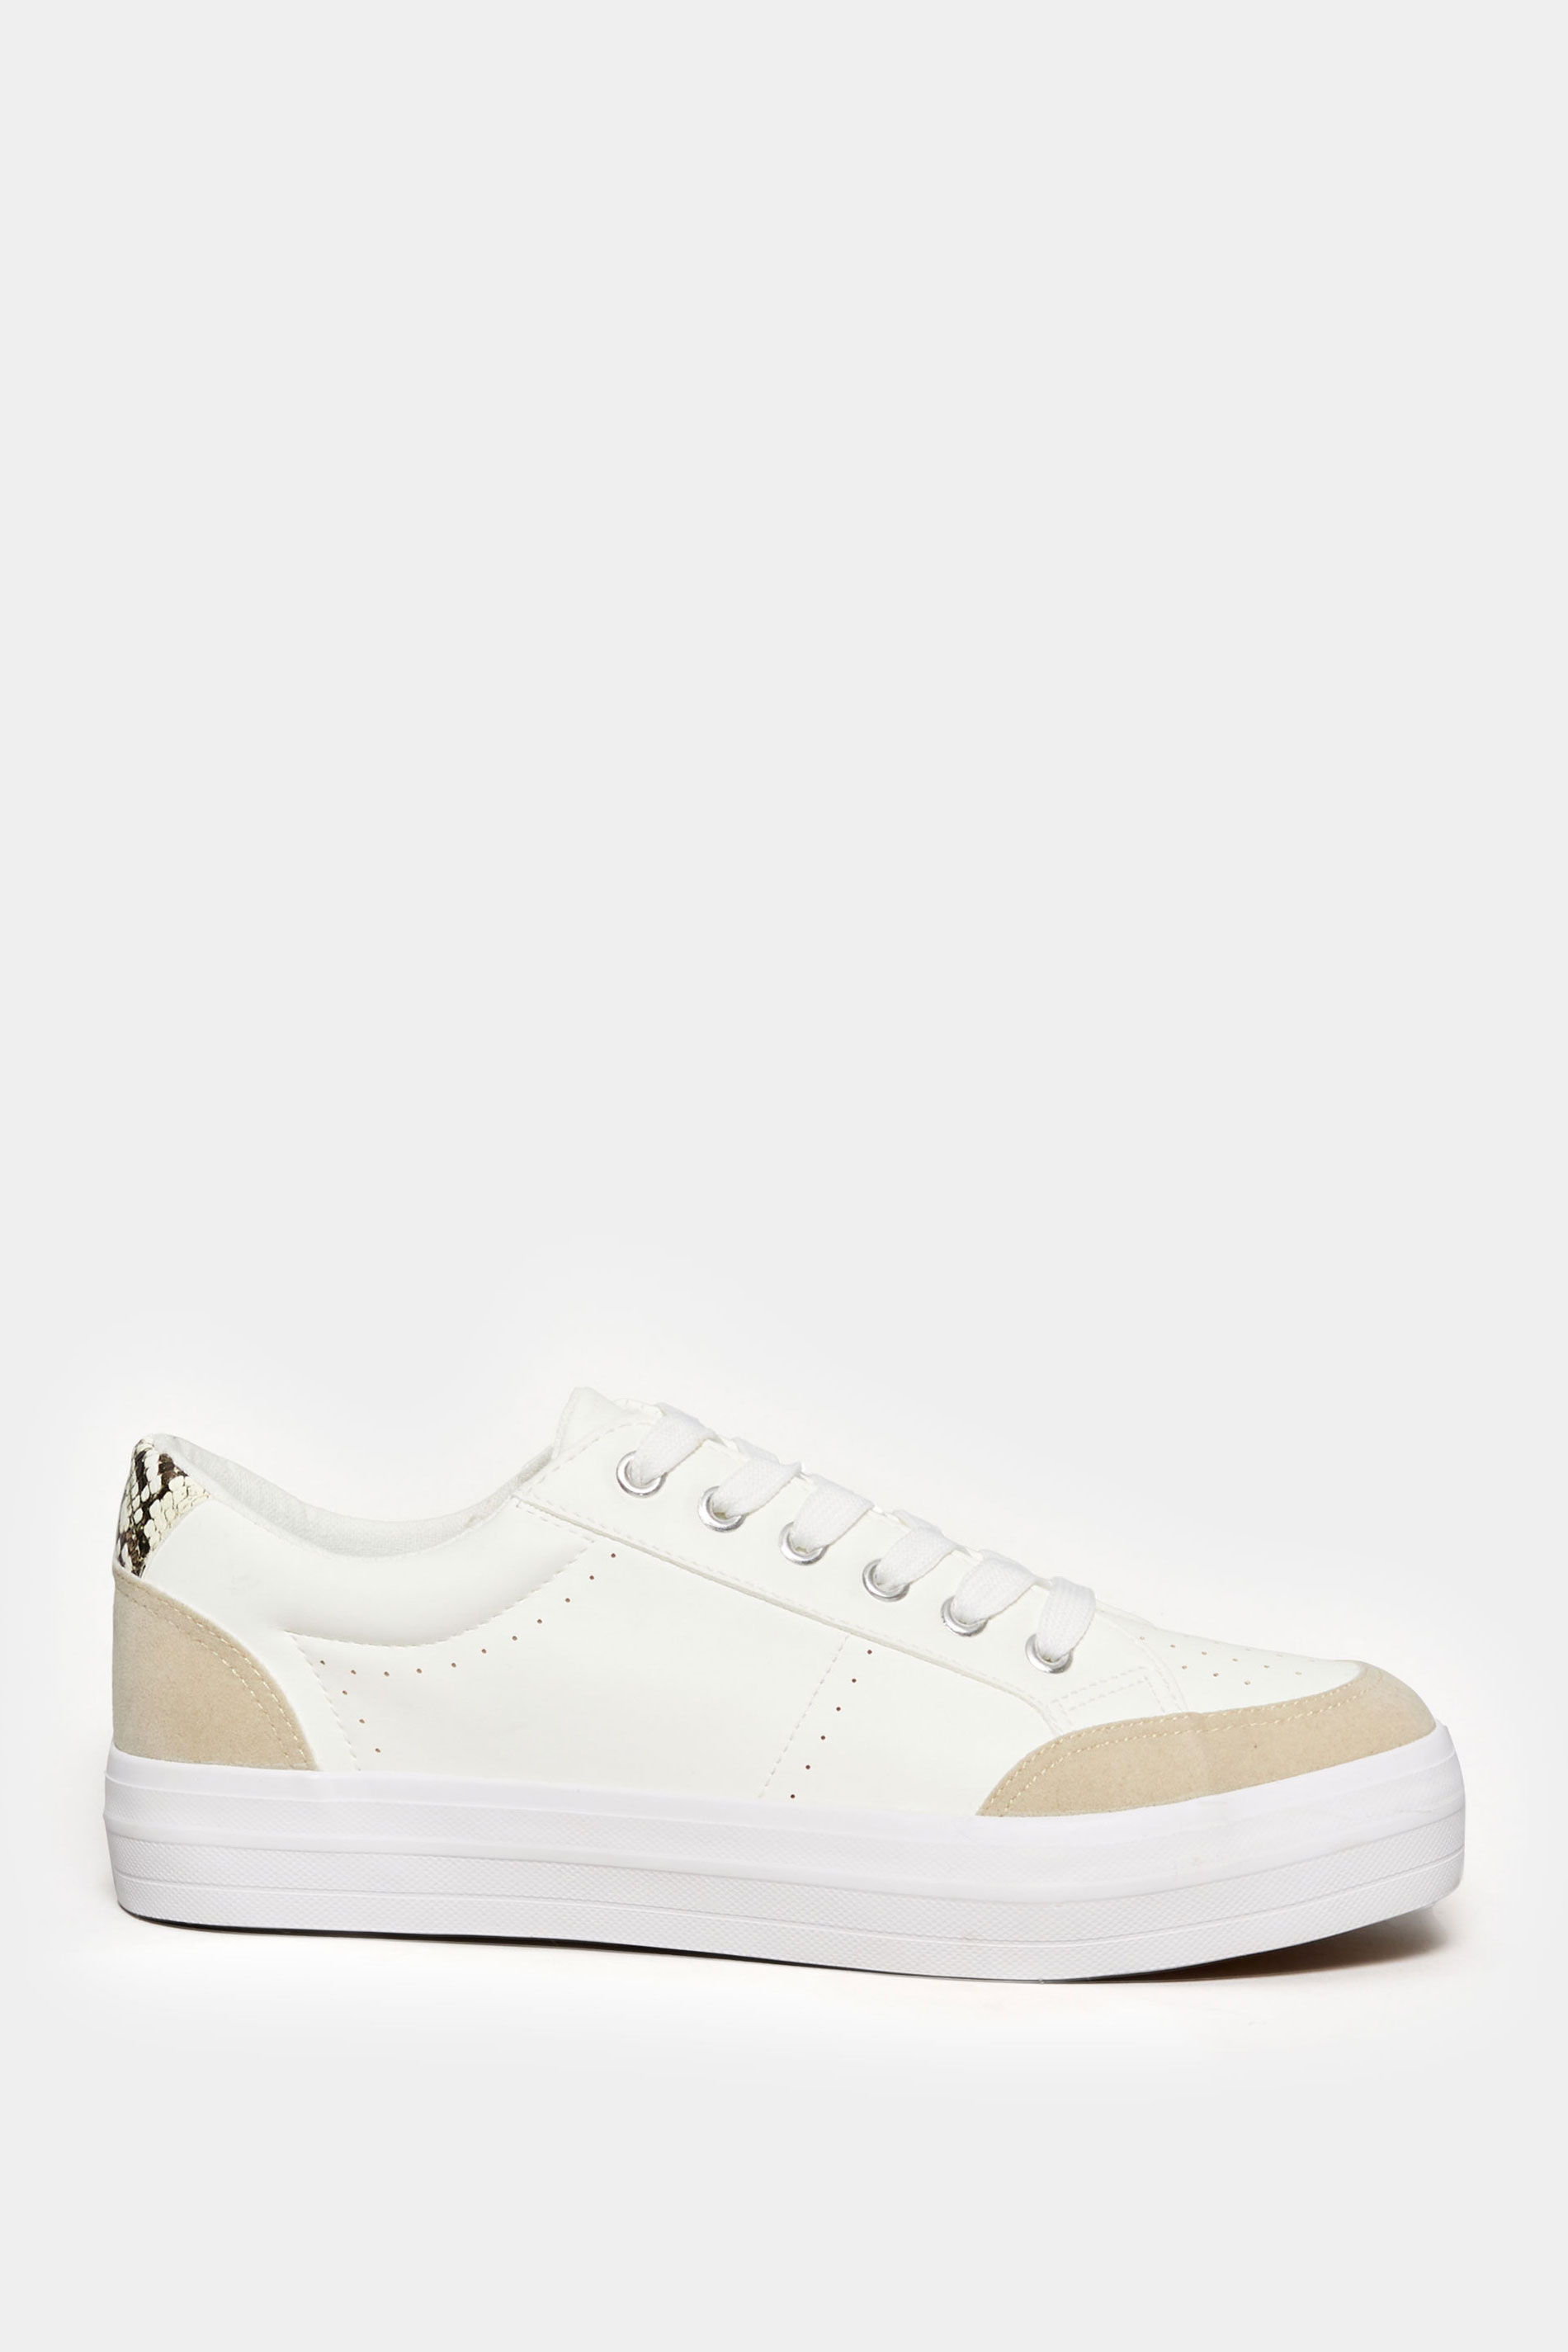 White Snake Print Trainers In Wide E Fit | Yours Clothing 3